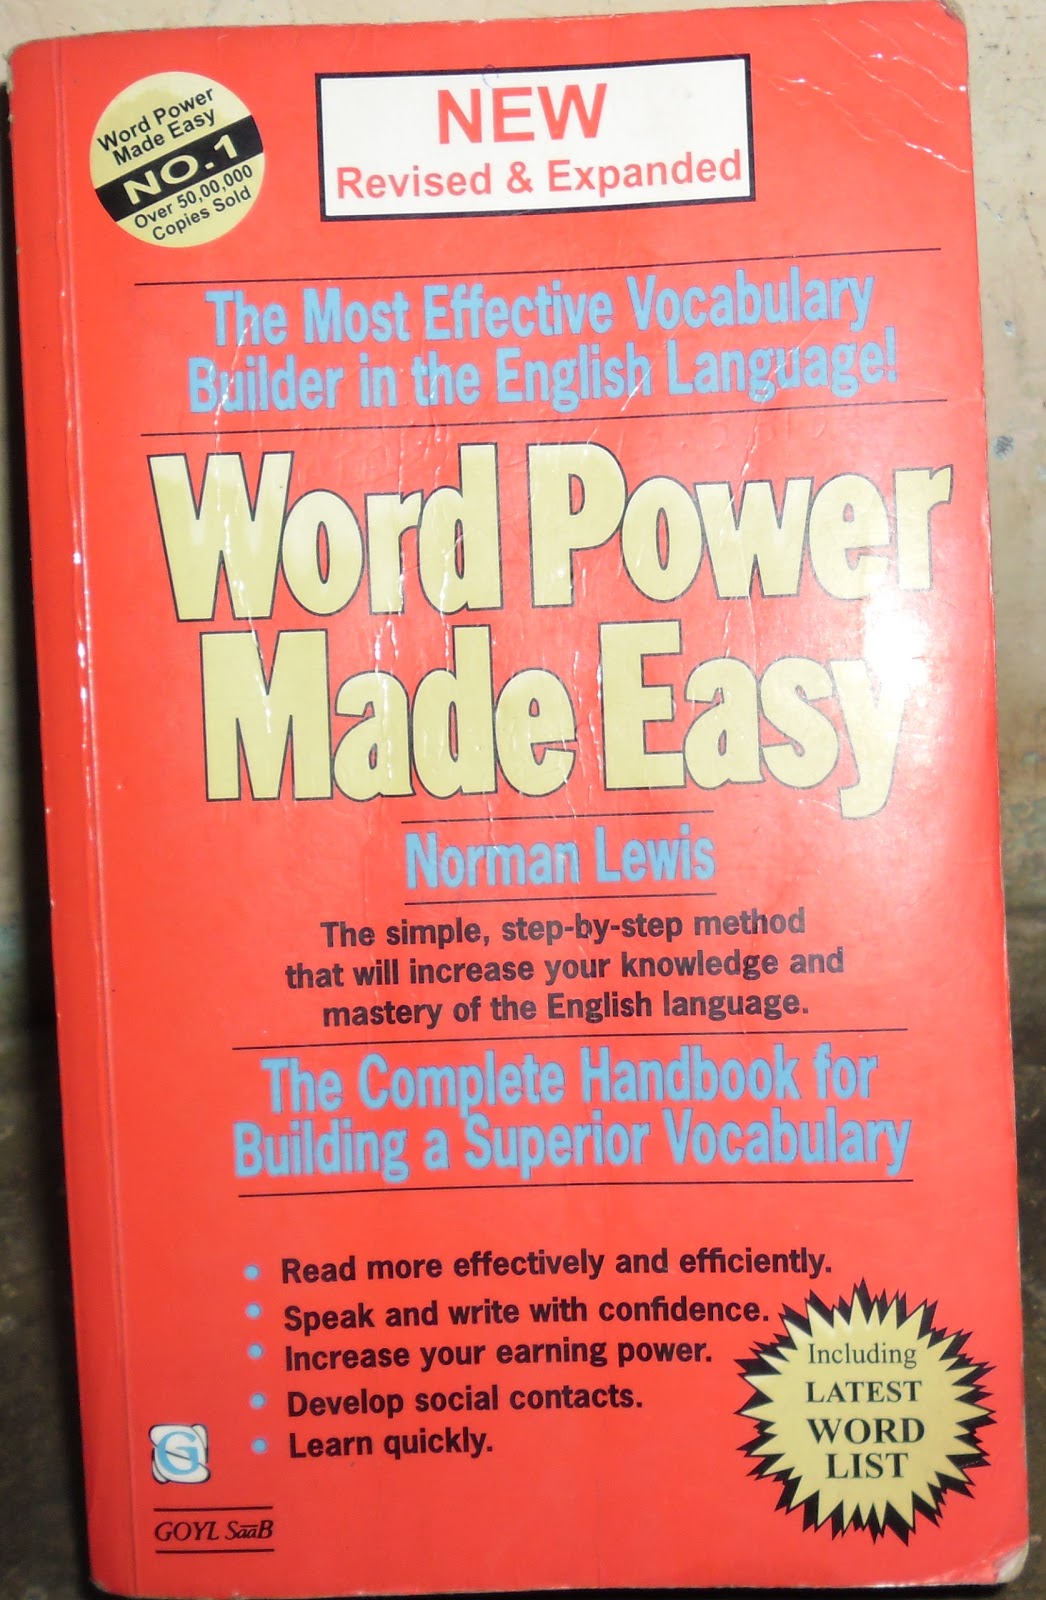 word power made easy review